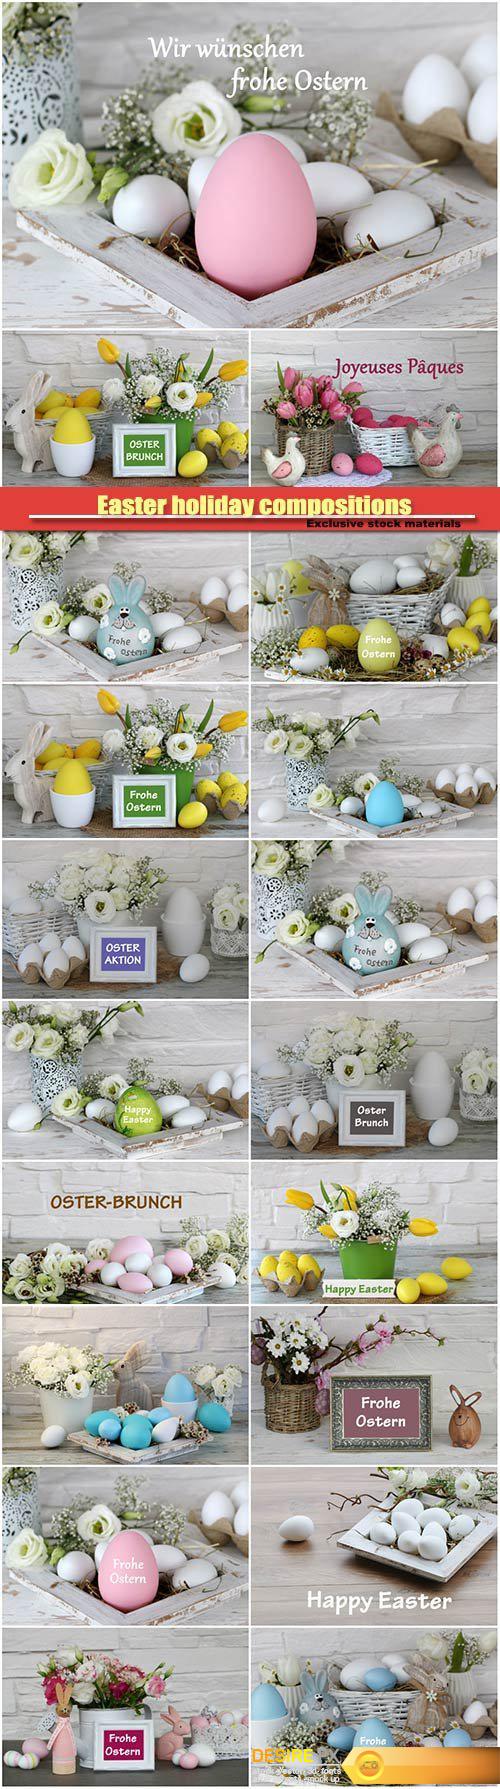 Easter holiday compositions